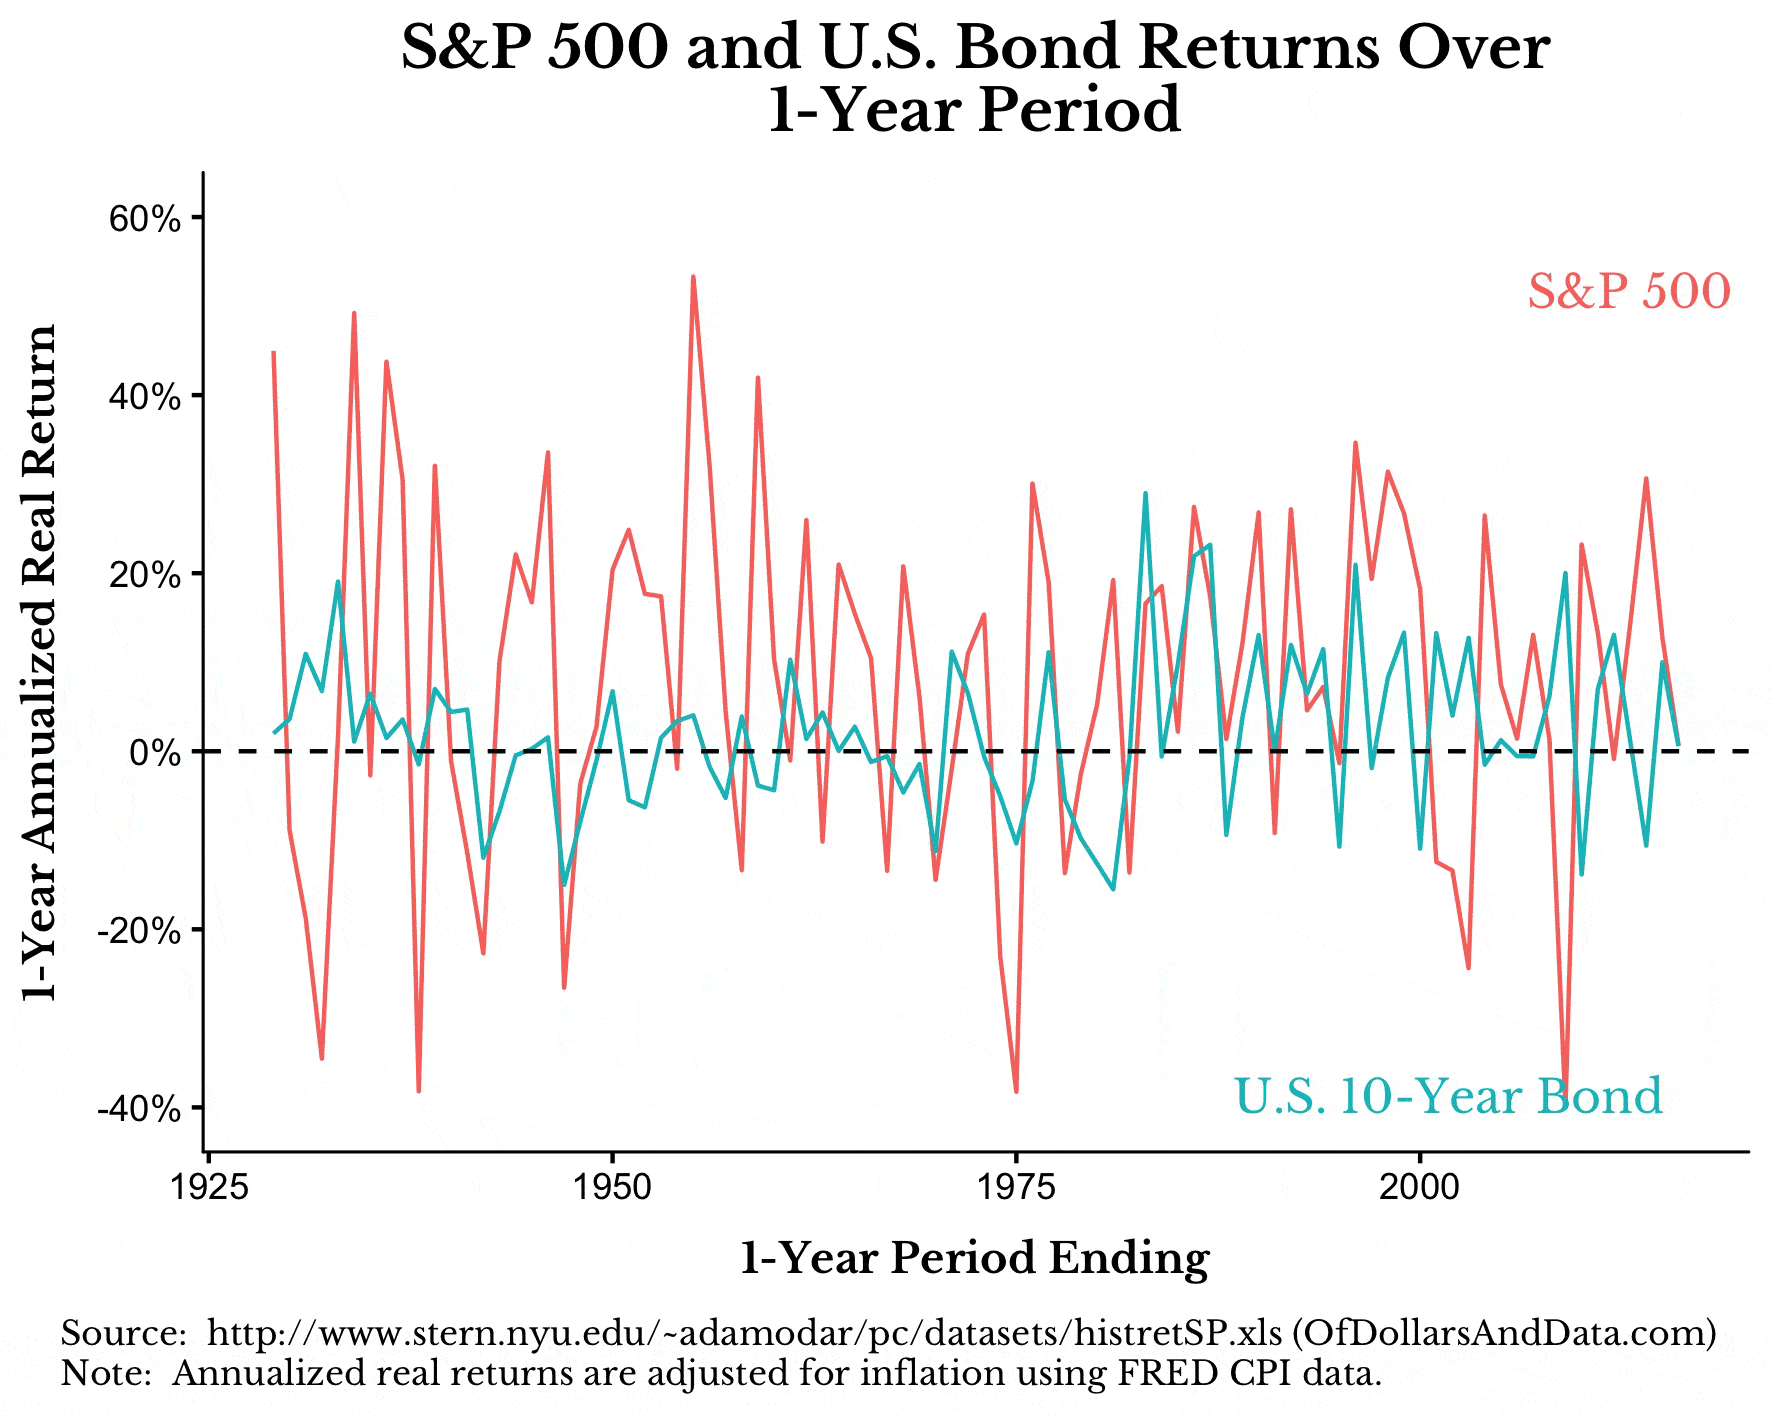 S&P 500 and US bond annualized real returns over various holding periods from the mid 1920s to the late 2010s.